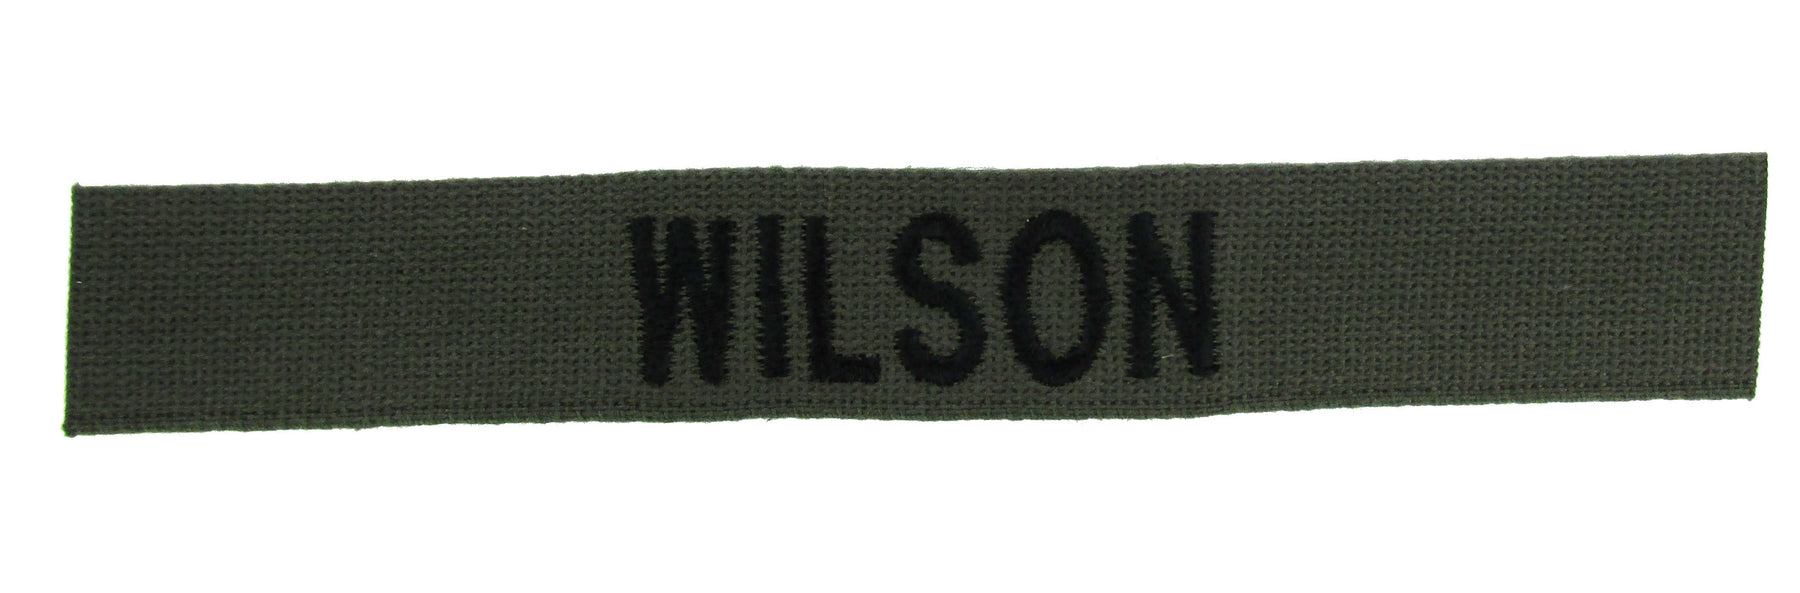 USAF BDU Olive Drab Name Tapes - Sewn On